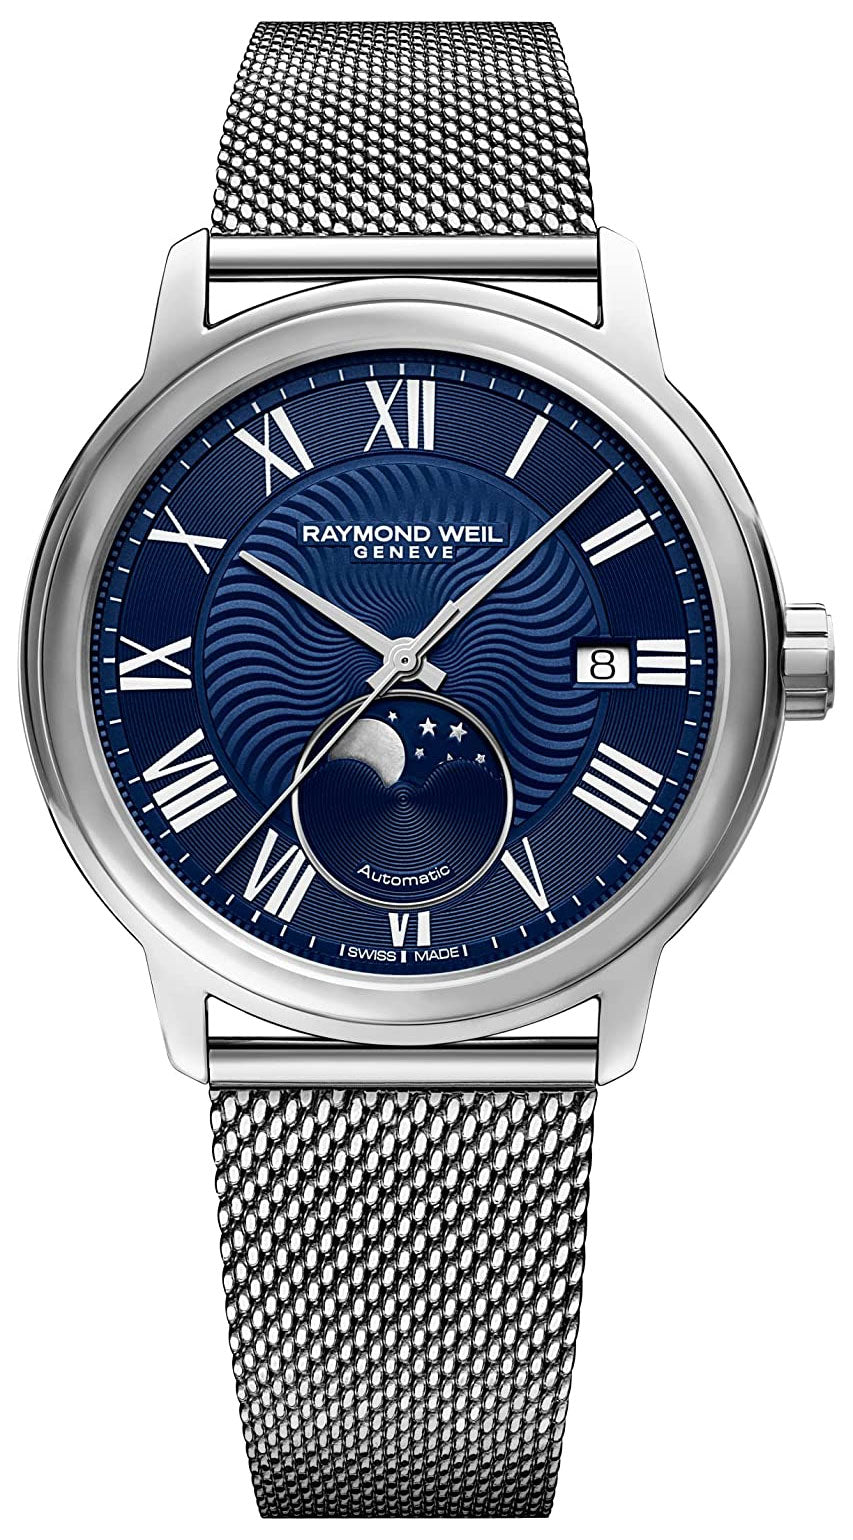 update alt-text with template Watches - Mens-Raymond Weil-2239M-ST-00509-35 - 40 mm, blue, date, Maestro, mens, menswatches, Moonphase, new arrivals, Raymond Weil, round, rpSKU_2227-STC-00508, rpSKU_2227-STC-00659, rpSKU_2237-PC5-65001, rpSKU_2239-STC-00509, rpSKU_2239M-ST-00659, stainless steel band, stainless steel case, swiss automatic, watches-Watches & Beyond